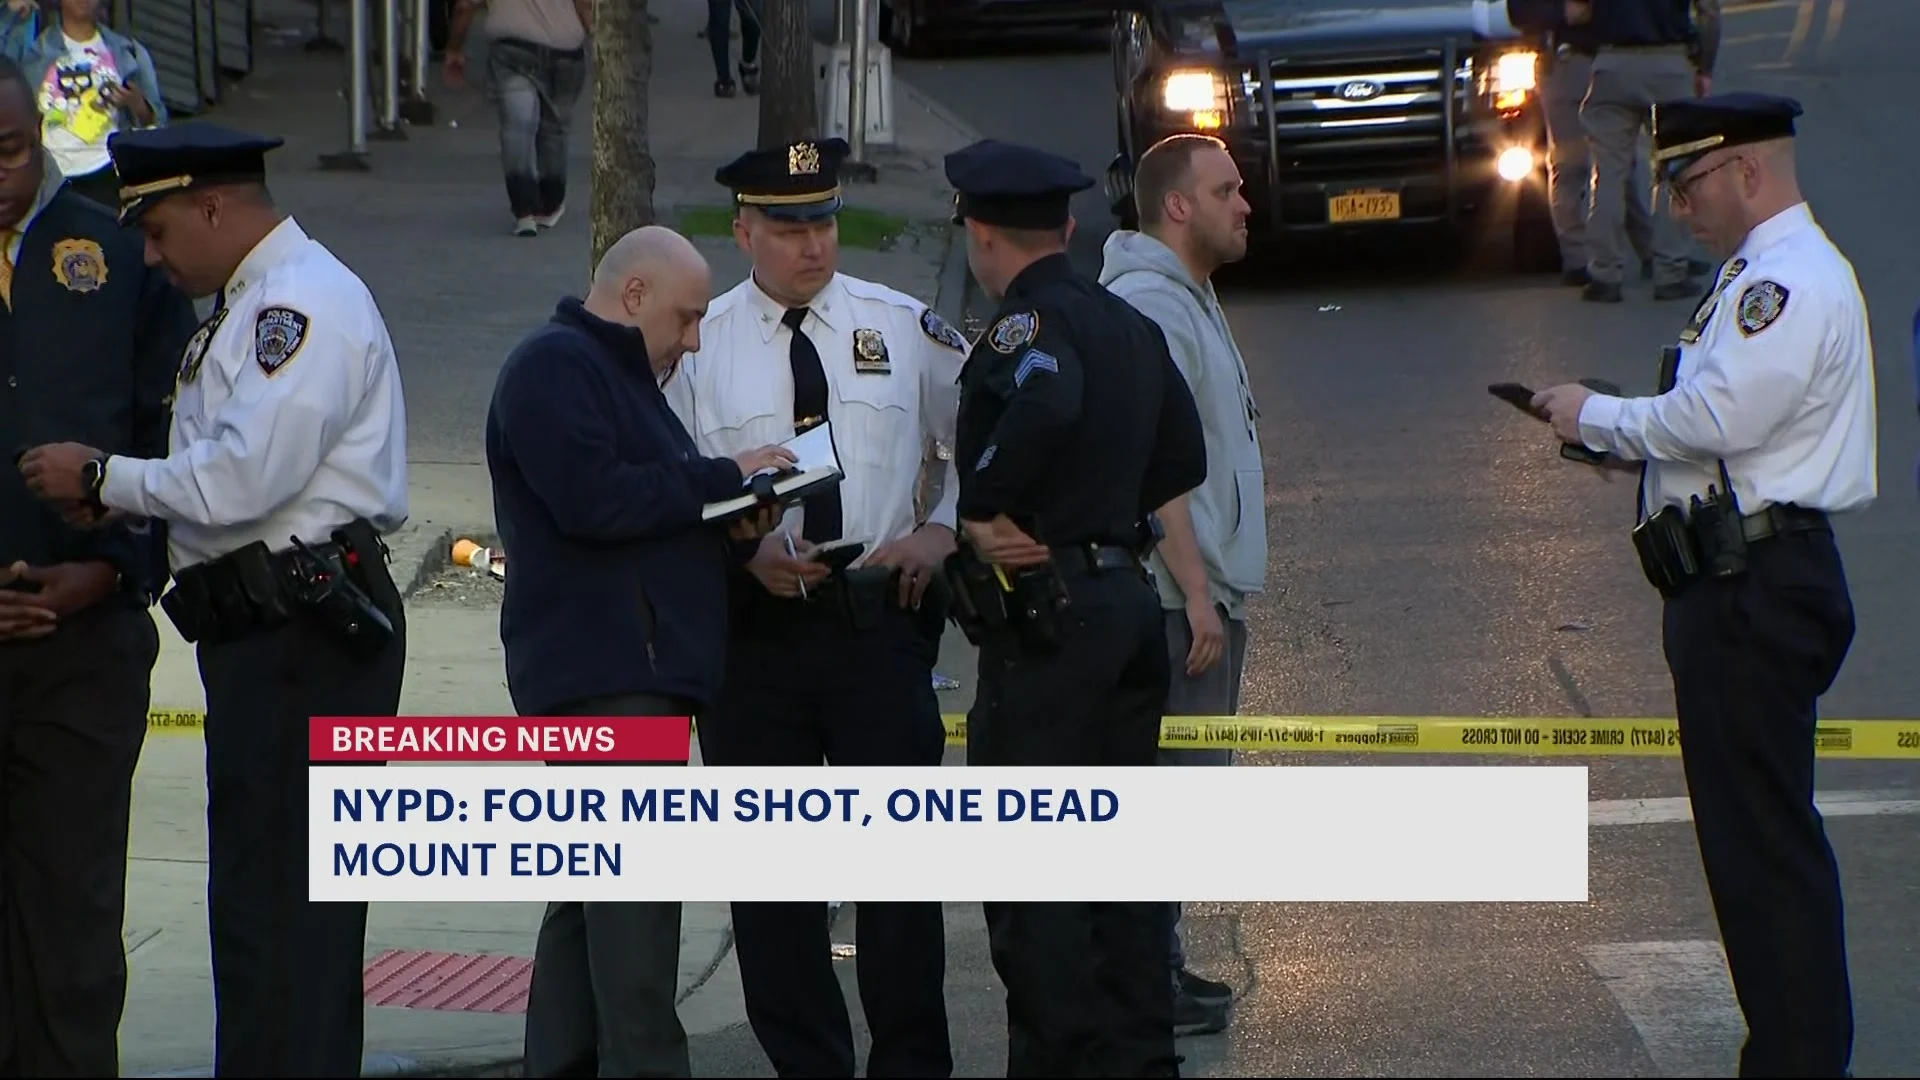 NYPD: 1 dead, at least 3 others injured in Mount Eden shooting; 1 person in custody